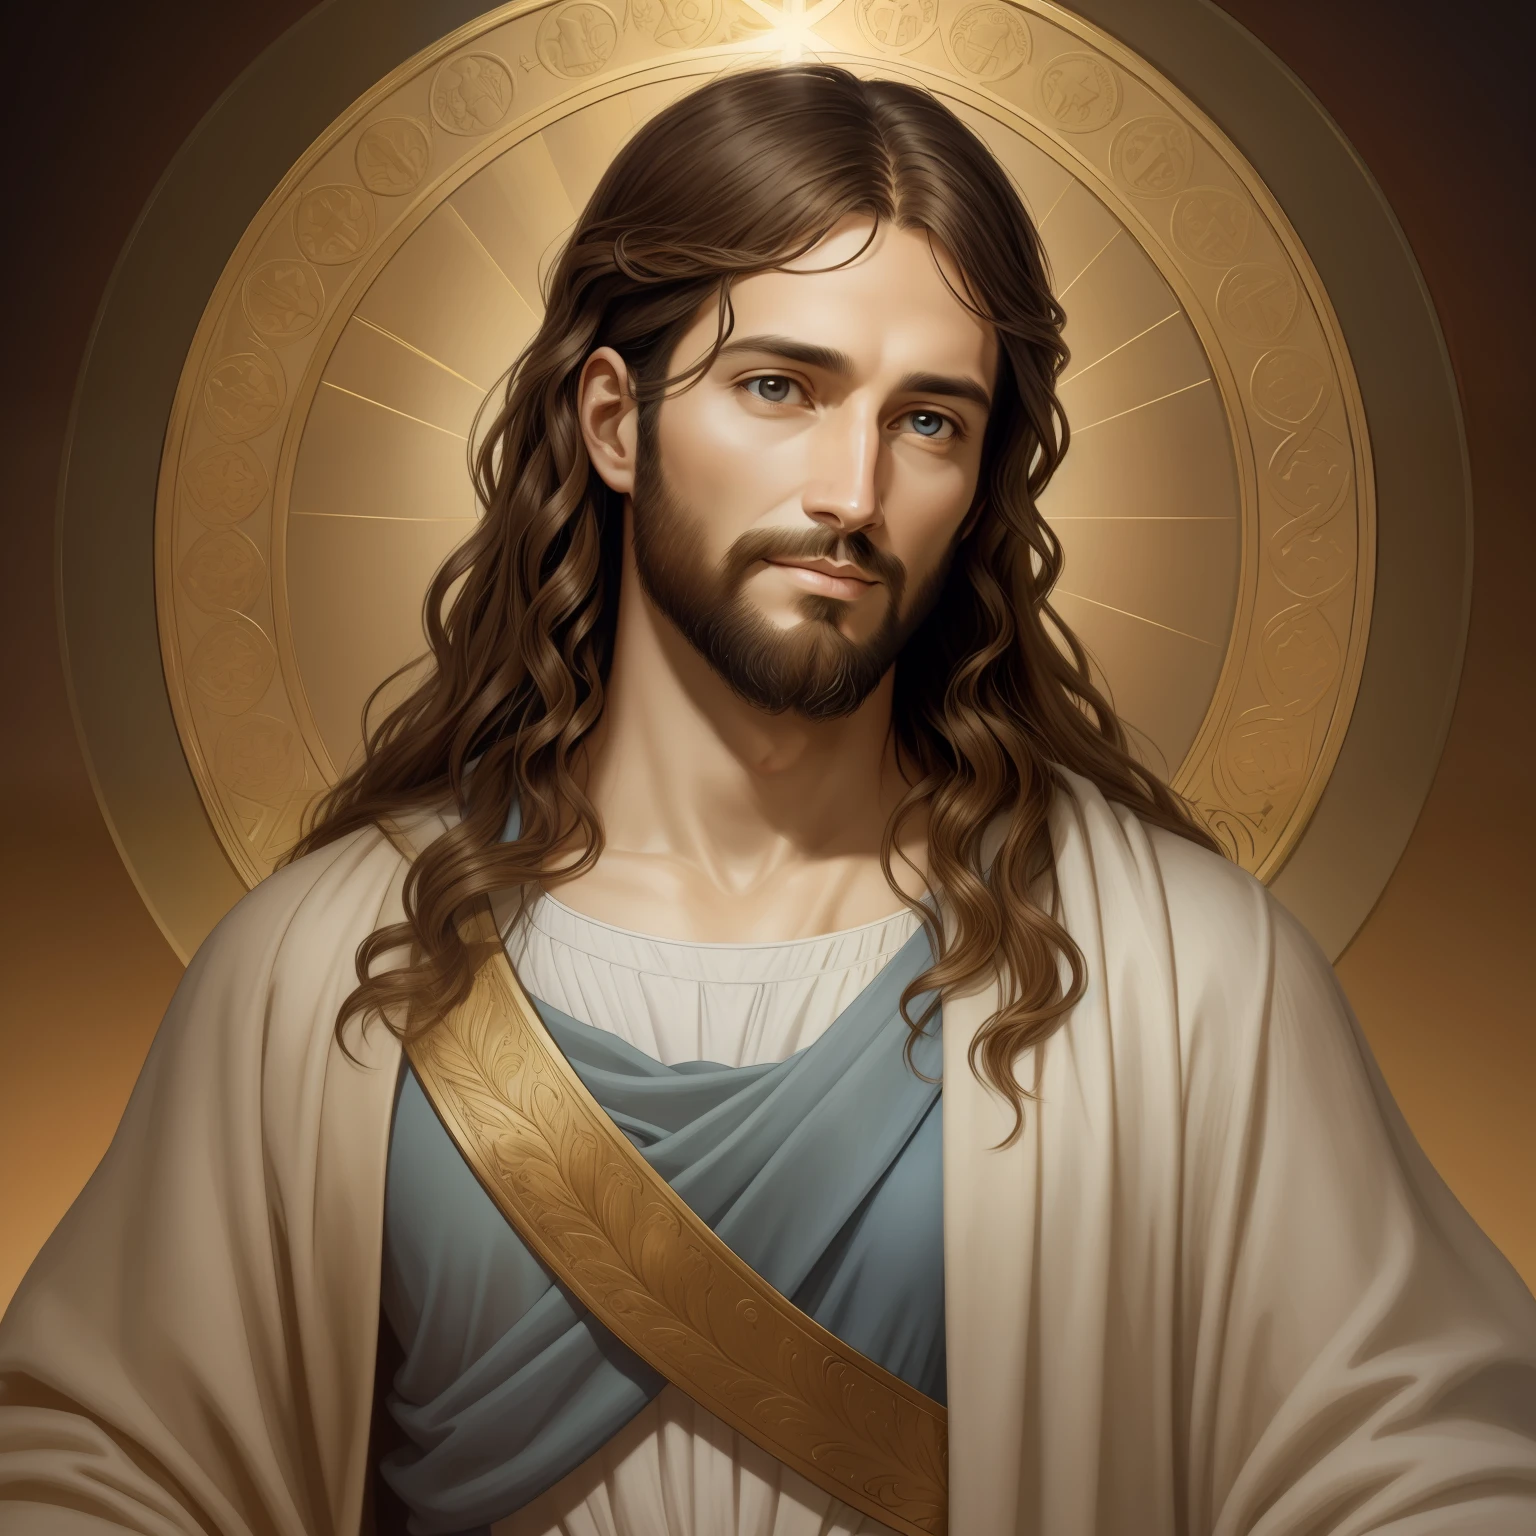 A beautiful ultra-thin realistic portrait of Jesus, the prophet, a man 34 years old Hebrew brunette, short brown hair, long brown beard, with, wearing long linen tunic closed on the chest part, in front view, full body, biblical, realistic,by Diego Velázquez,Peter Paul Rubens,Rembrandt,Alex Ross,8k, Concept Art, PhotoRealistic, Realistic,  Illustration, Oil Painting, Surrealism, HyperRealistic, Digital art, style, watercolor 
a 3D Realistic of jesus with a halo in the sky, jesus christ, smiling in heaven, portrait of jesus christ, jesus face, 33 young almighty god, portrait of a heavenly god, greg olsen, gigachad jesus, jesus of nazareth, jesus, the face of god, god looking at me, he is greeting you warmly, he is happy, avatar image